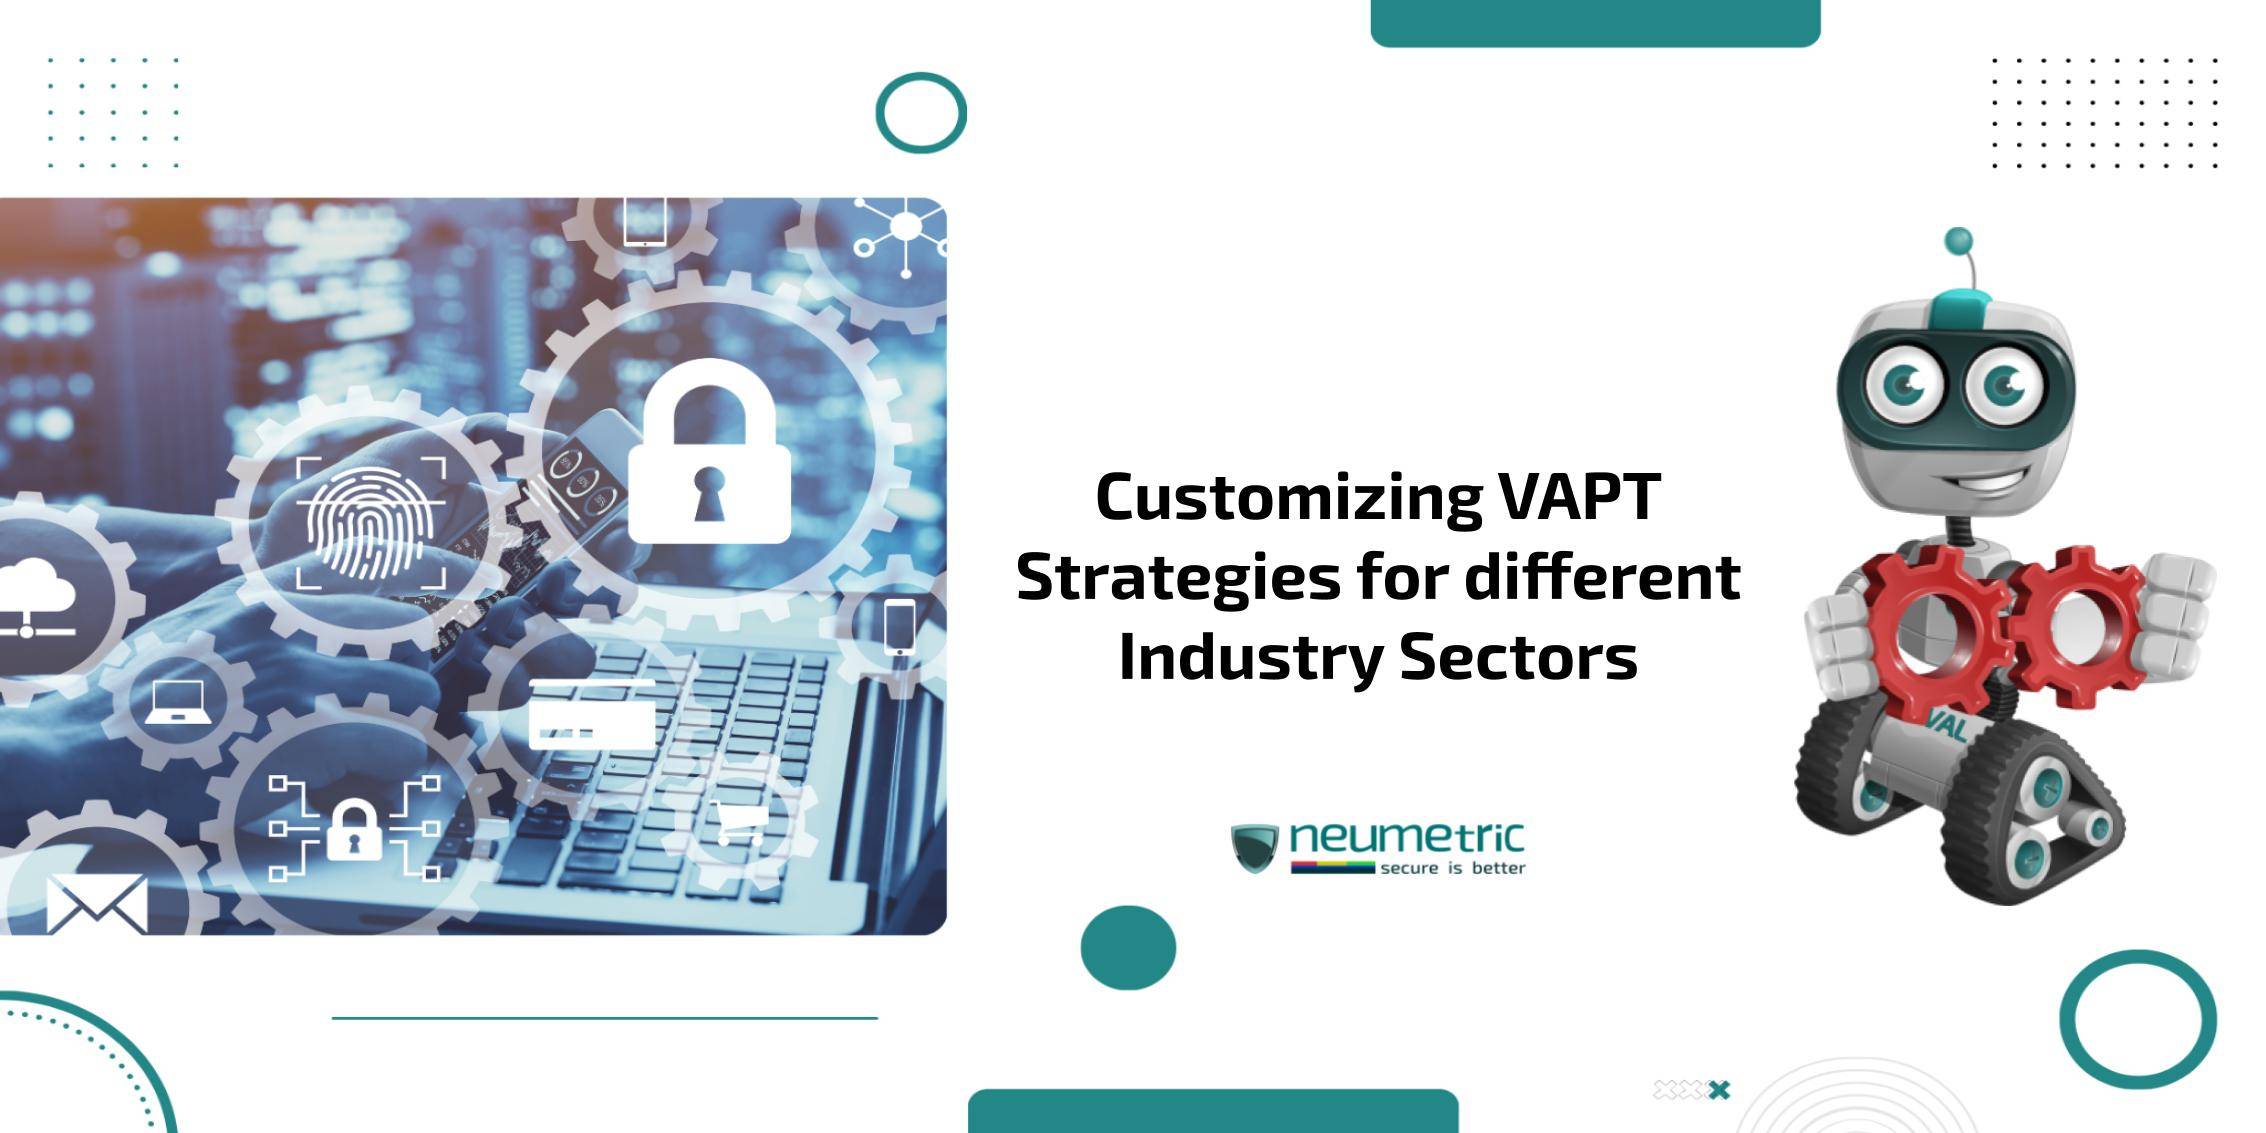 Customizing VAPT Strategies for different Industry Sectors